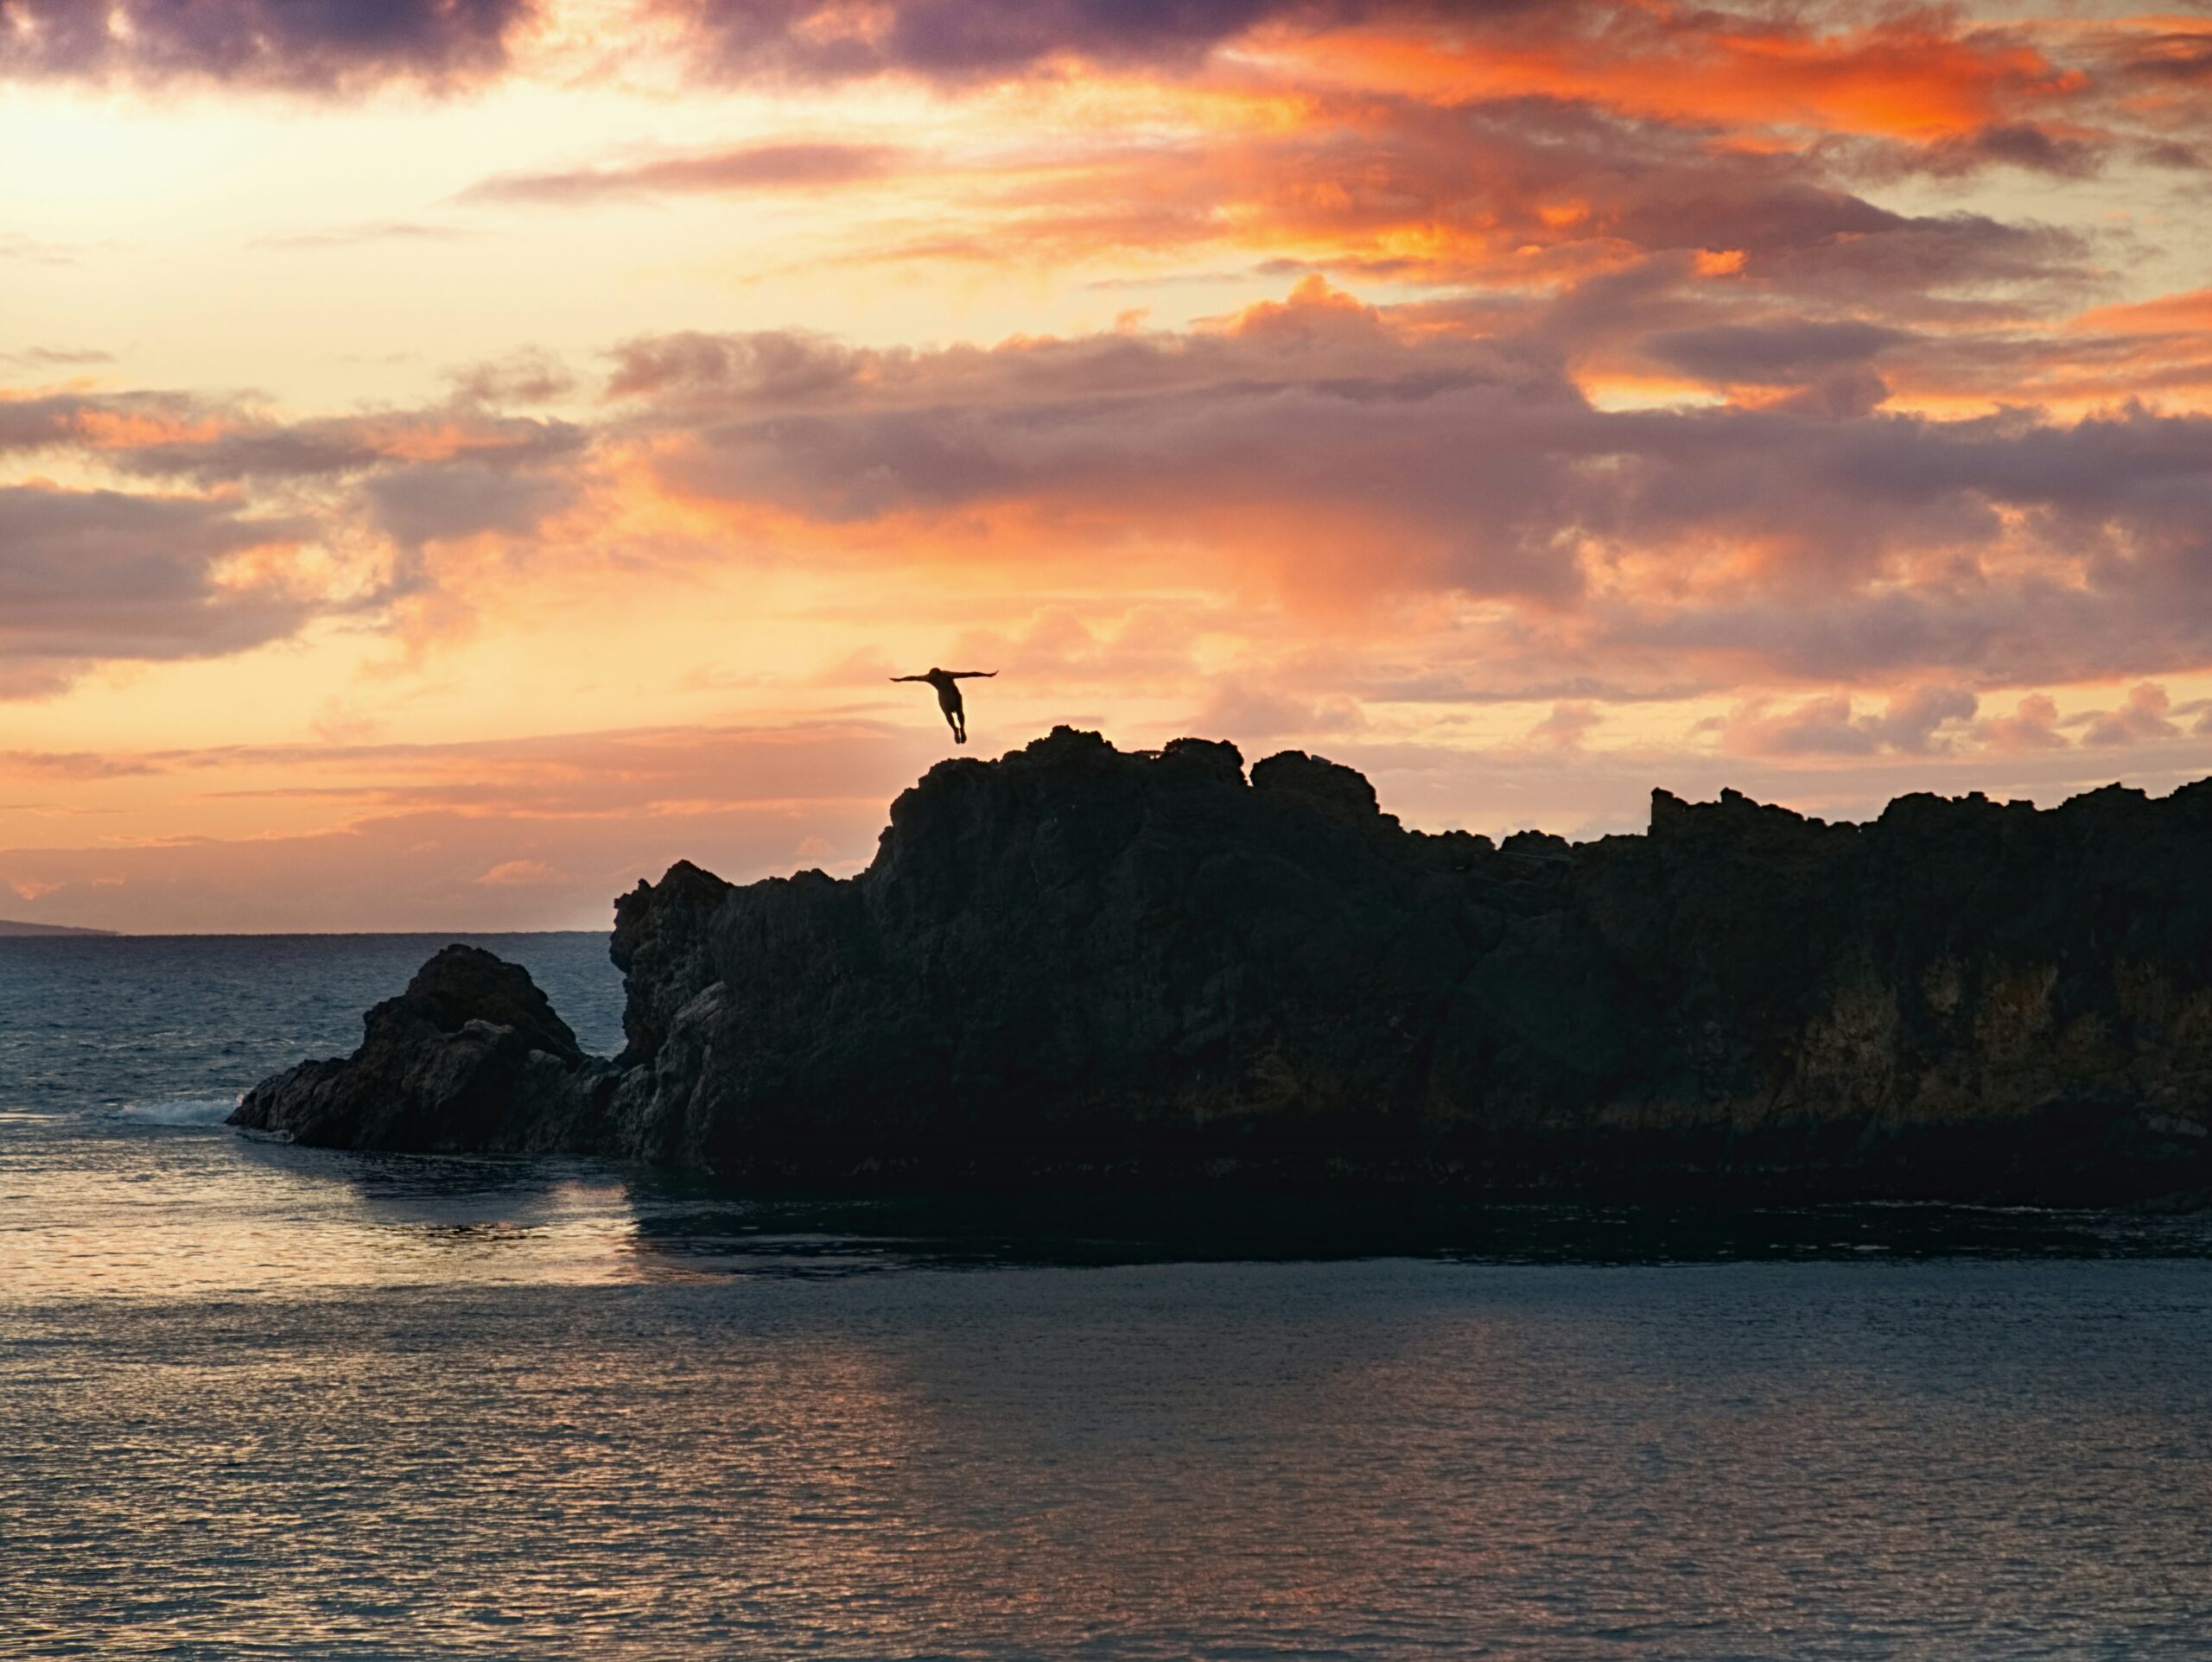 China Walls is unique and slightly dangerous site in Hawaii. Learn more about its origins. 
pictured: A cliff jumper enjoying the Hawaiian sunset and getting into the water